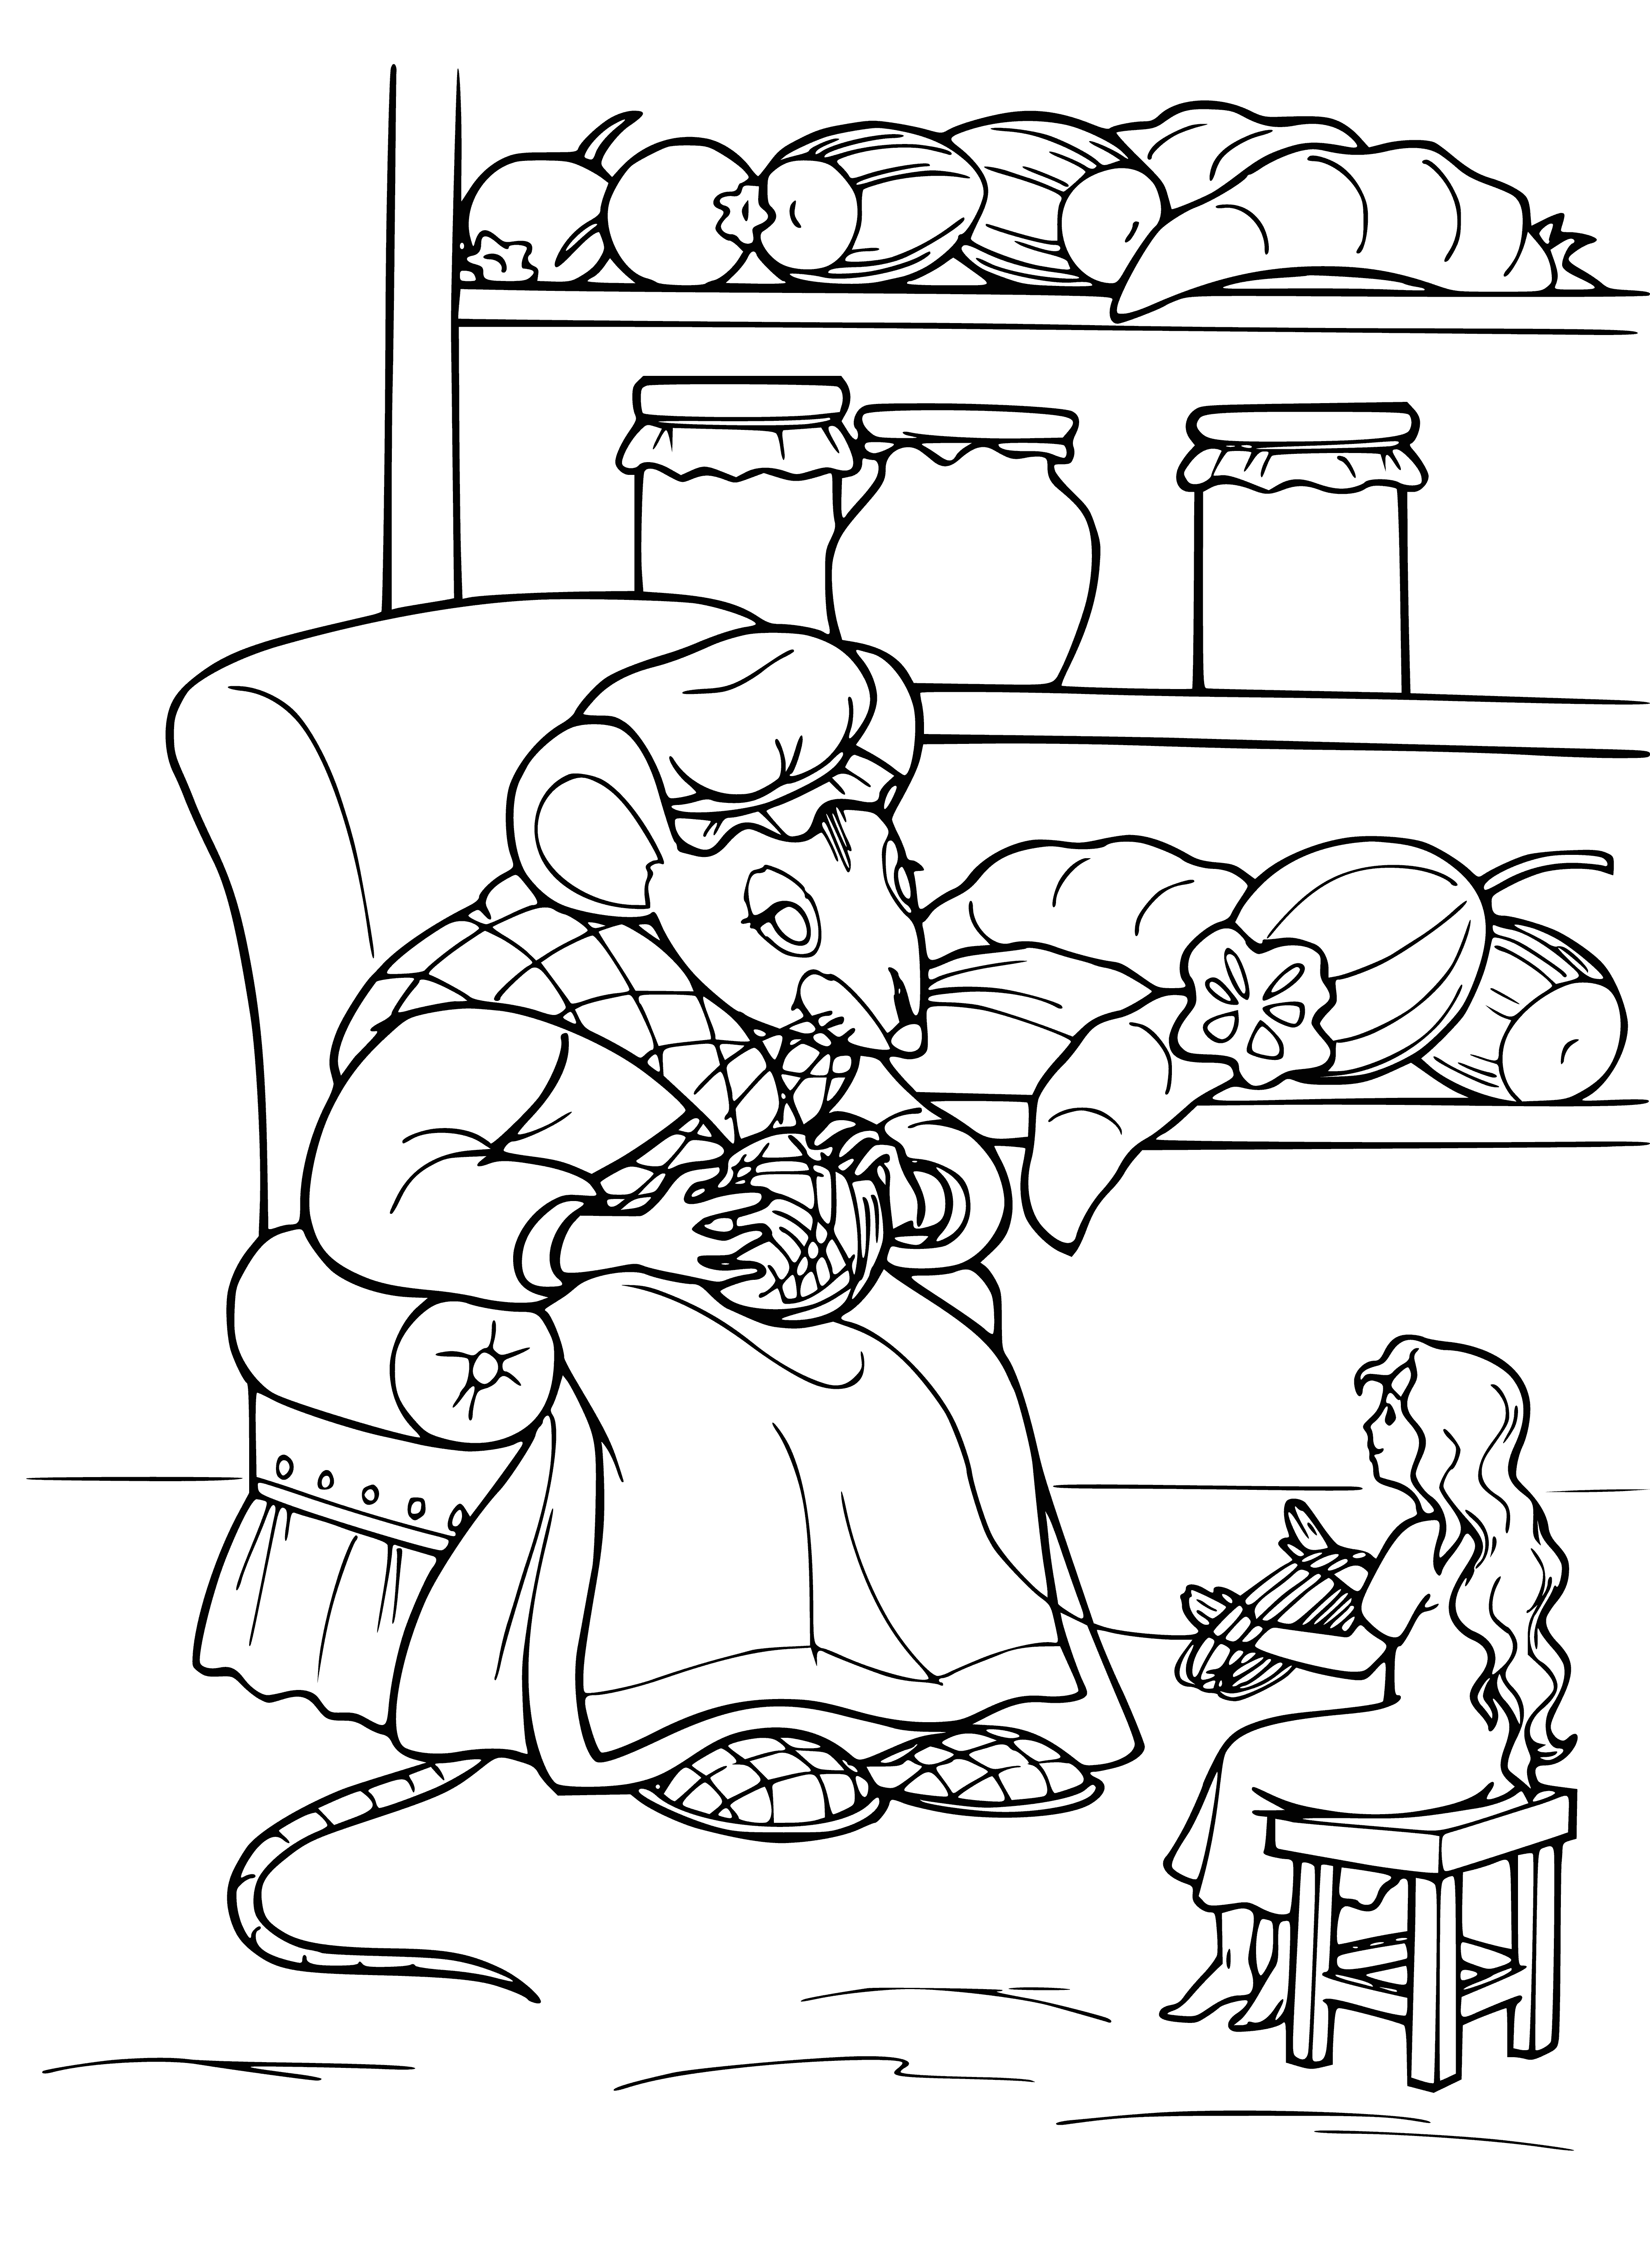 Thumbelina at the sex mouse coloring page